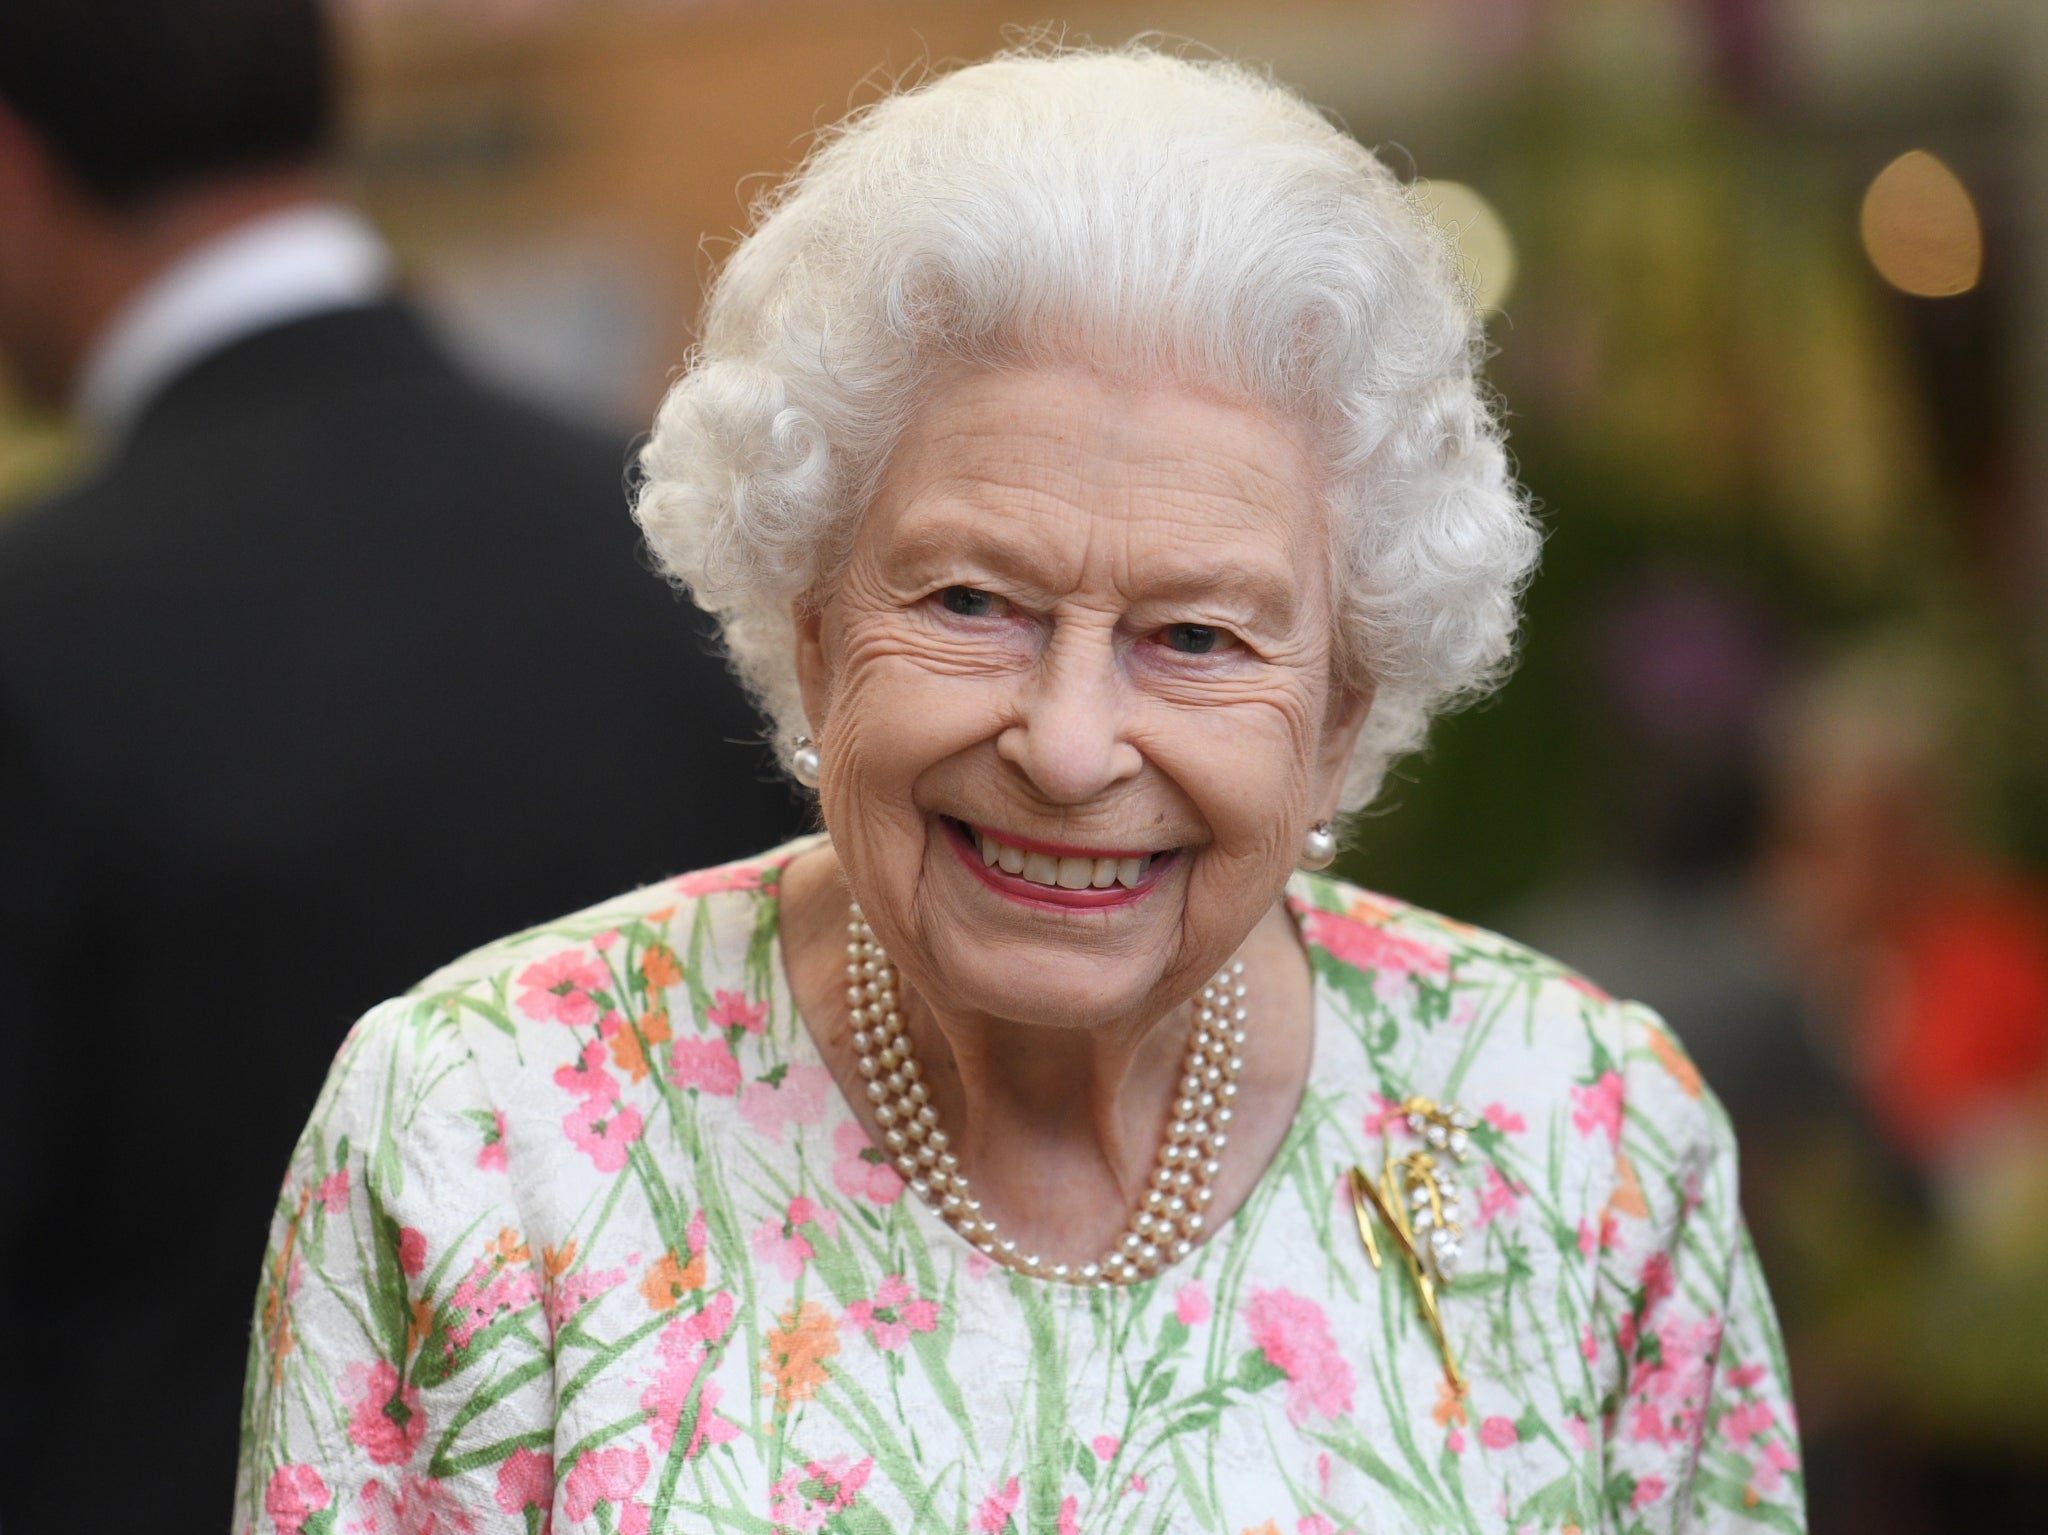 The Queen’s mobility troubles have been going on since October